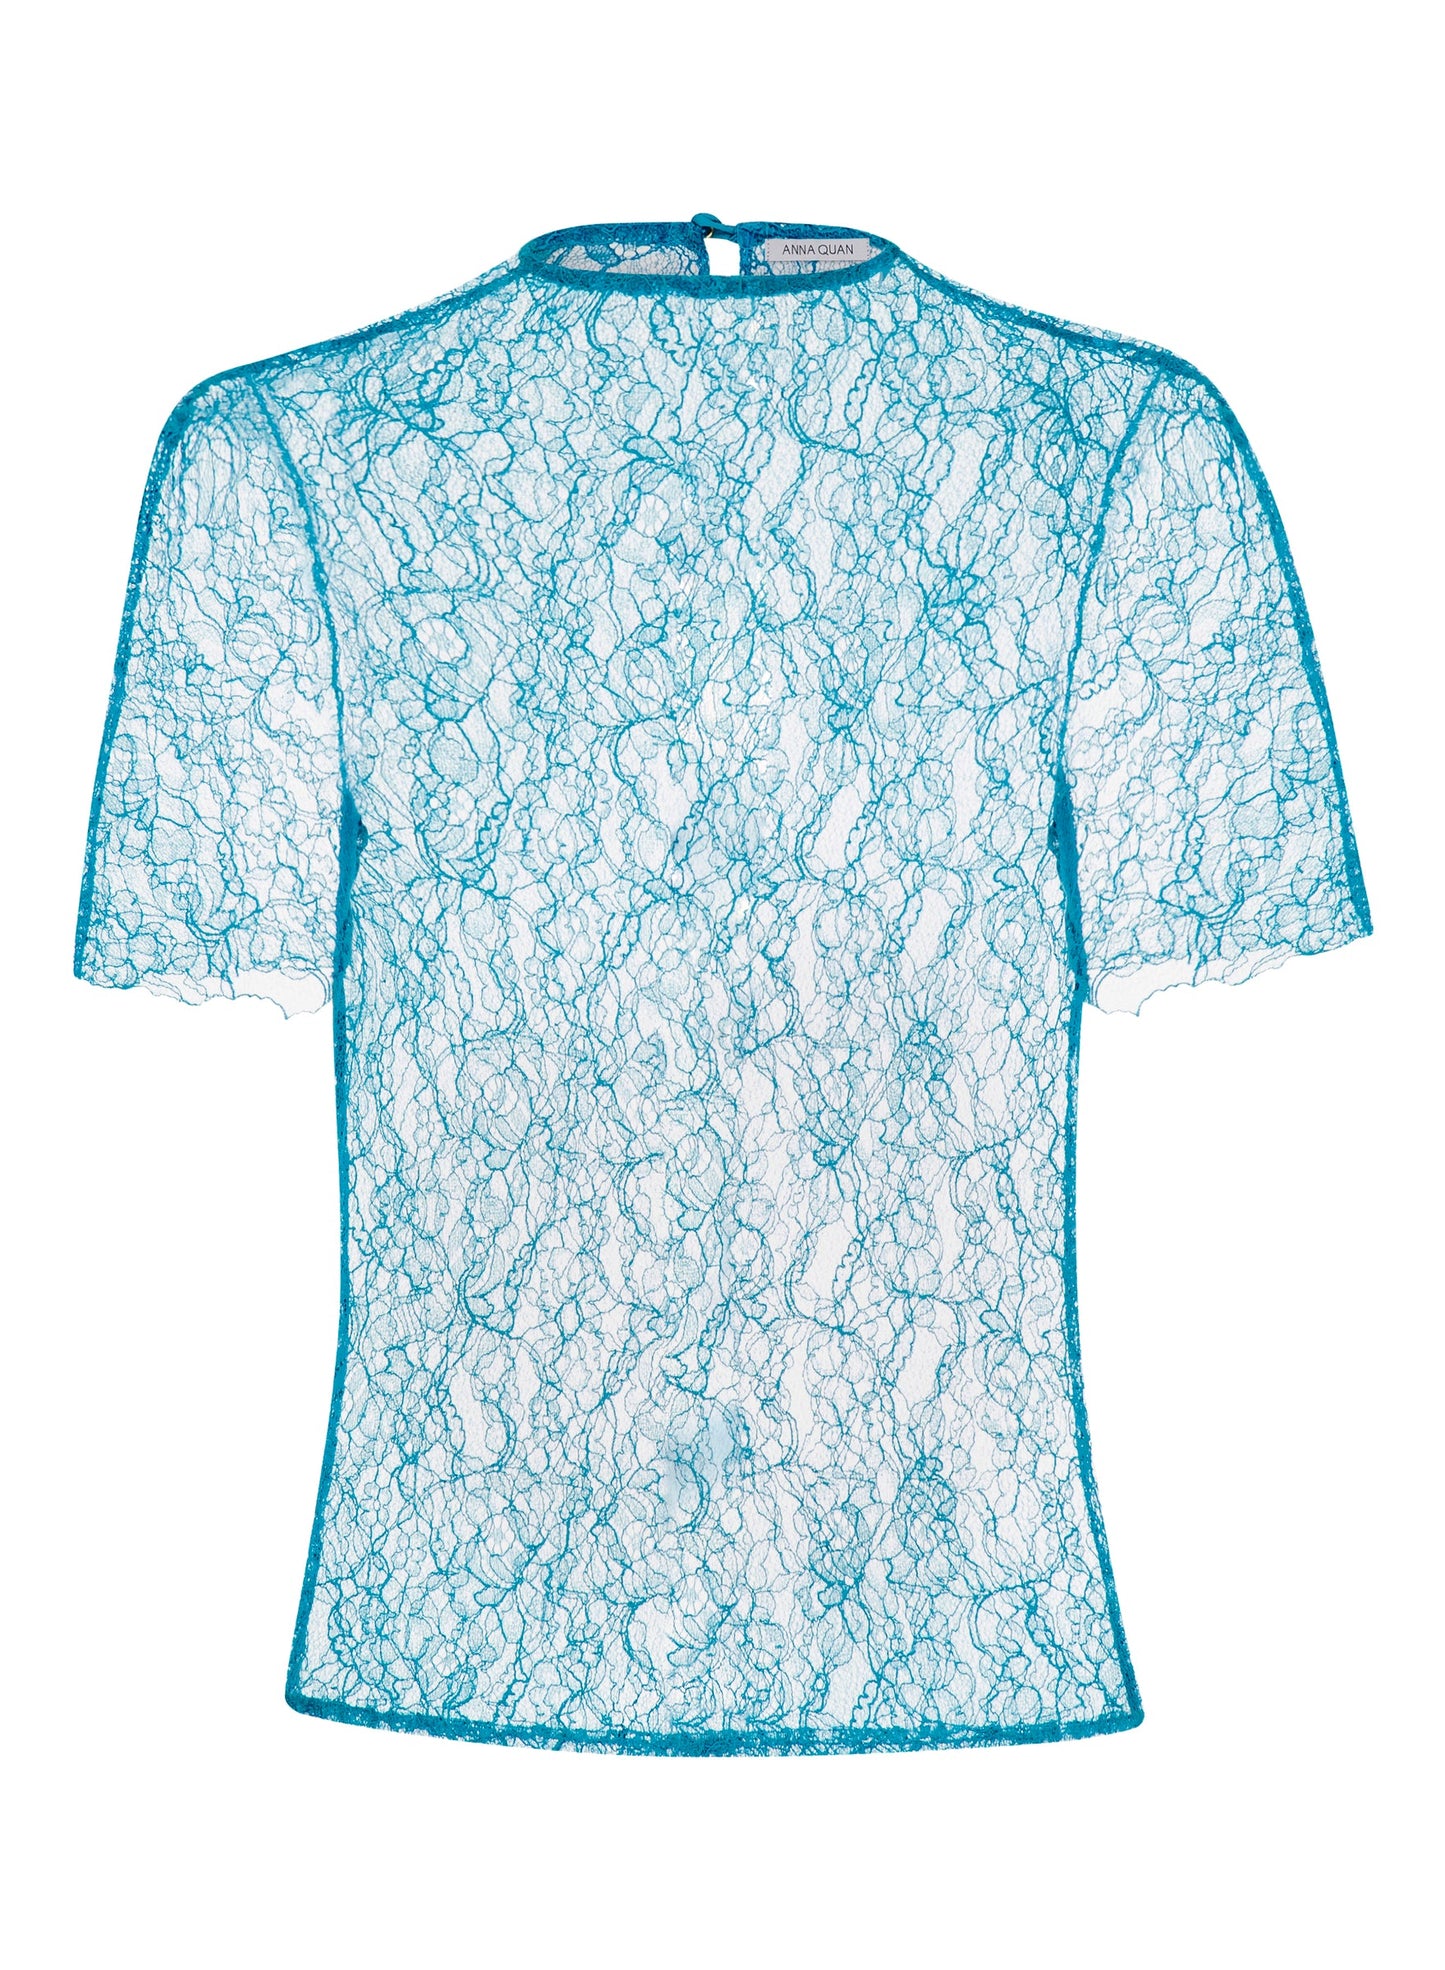 COCO TOP (TEAL LACE)